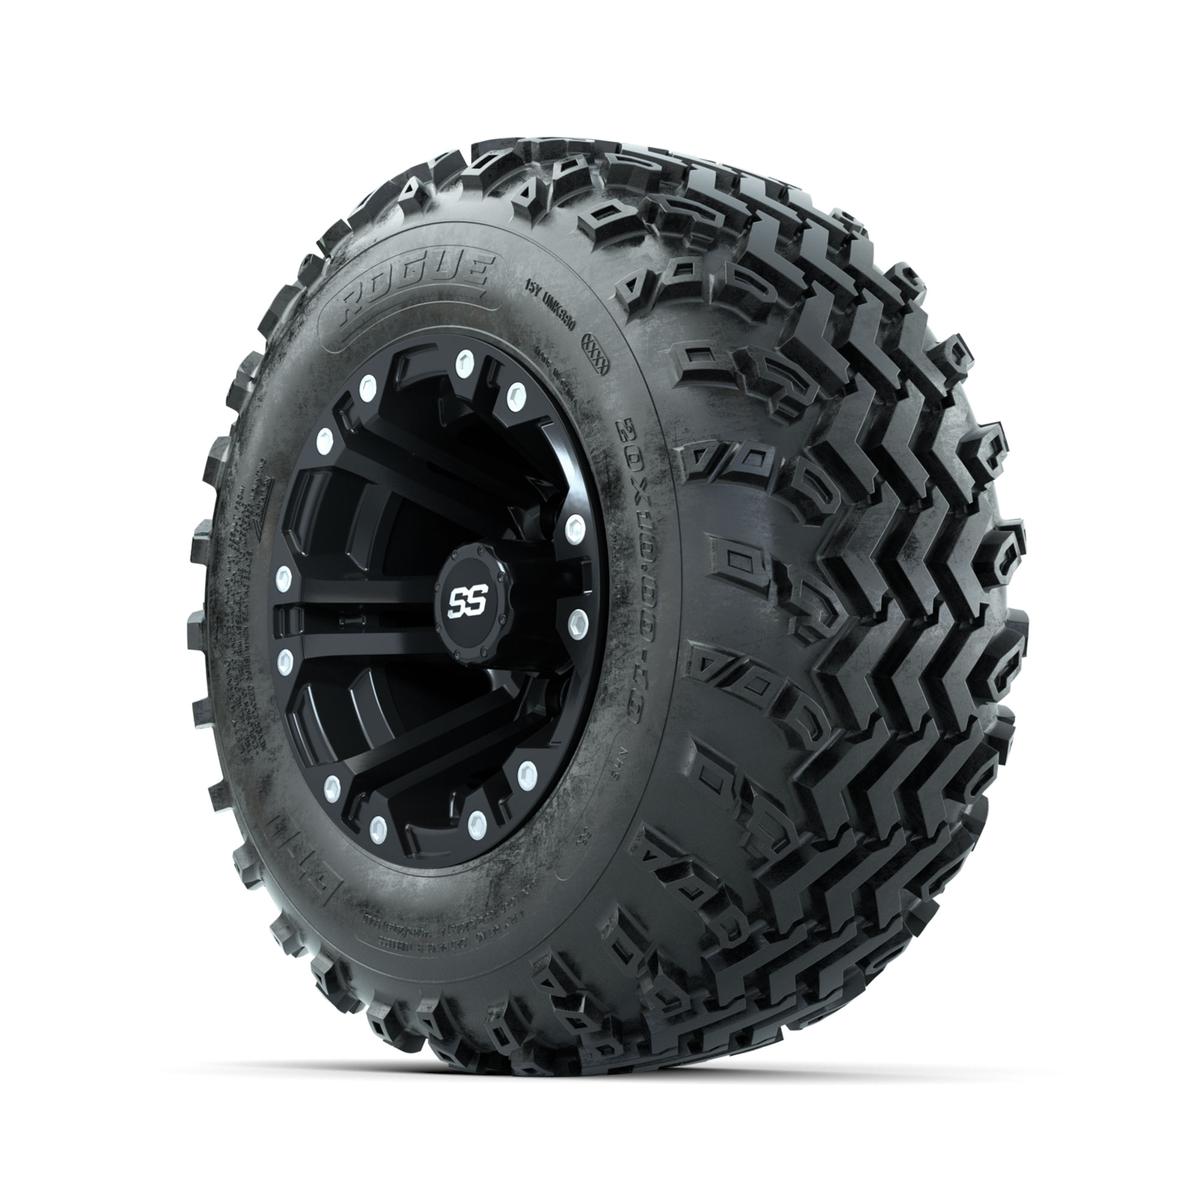 GTW Specter Matte Black 10 in Wheels with 20x10.00-10 Rogue All Terrain Tires – Full Set